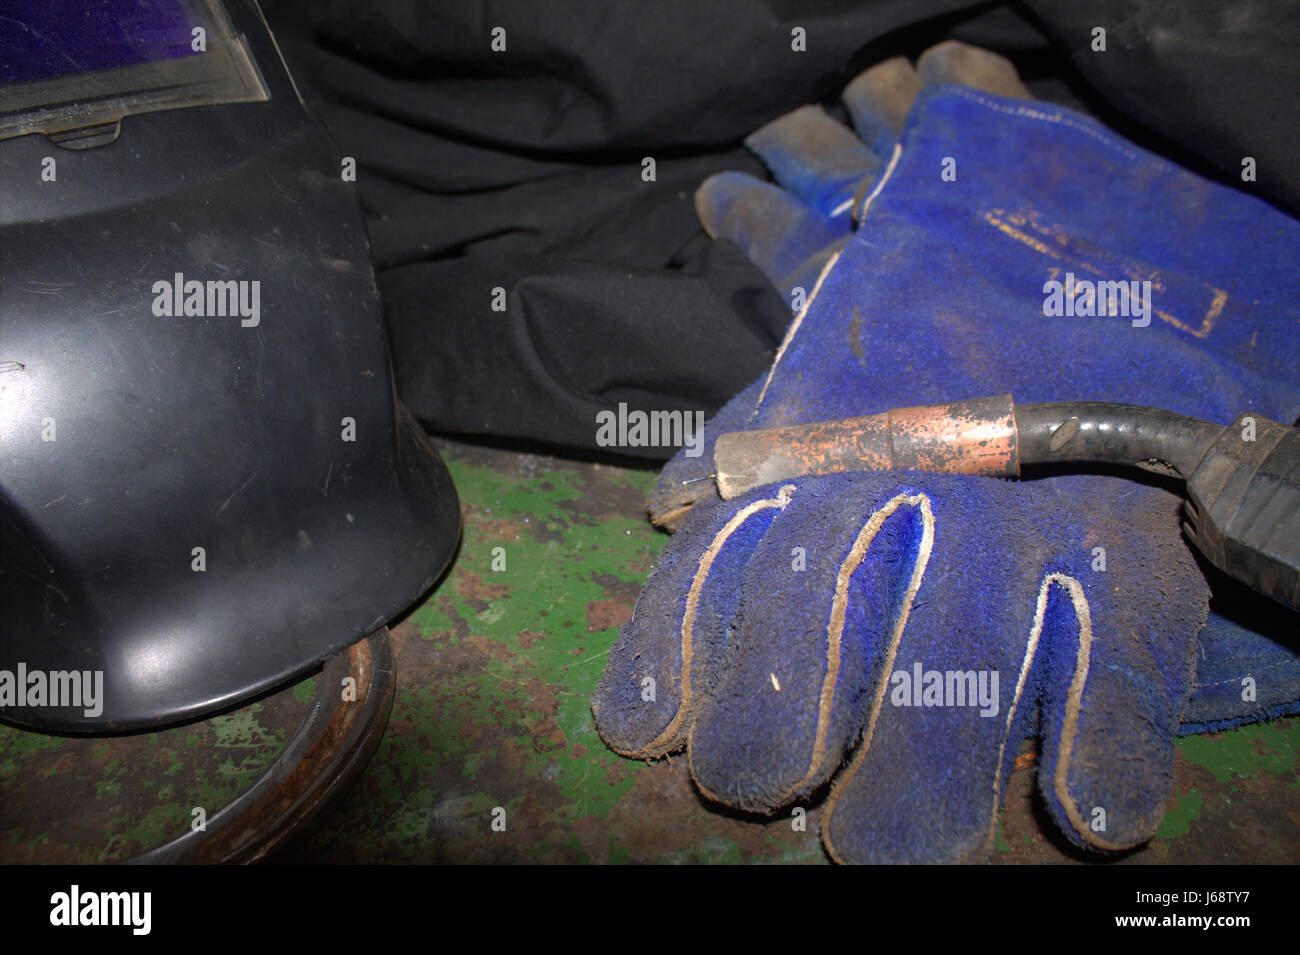 Close up of a welding helmet and welding gun laying on blue welding gloves laying on a green table with peeling paint. Stock Photo